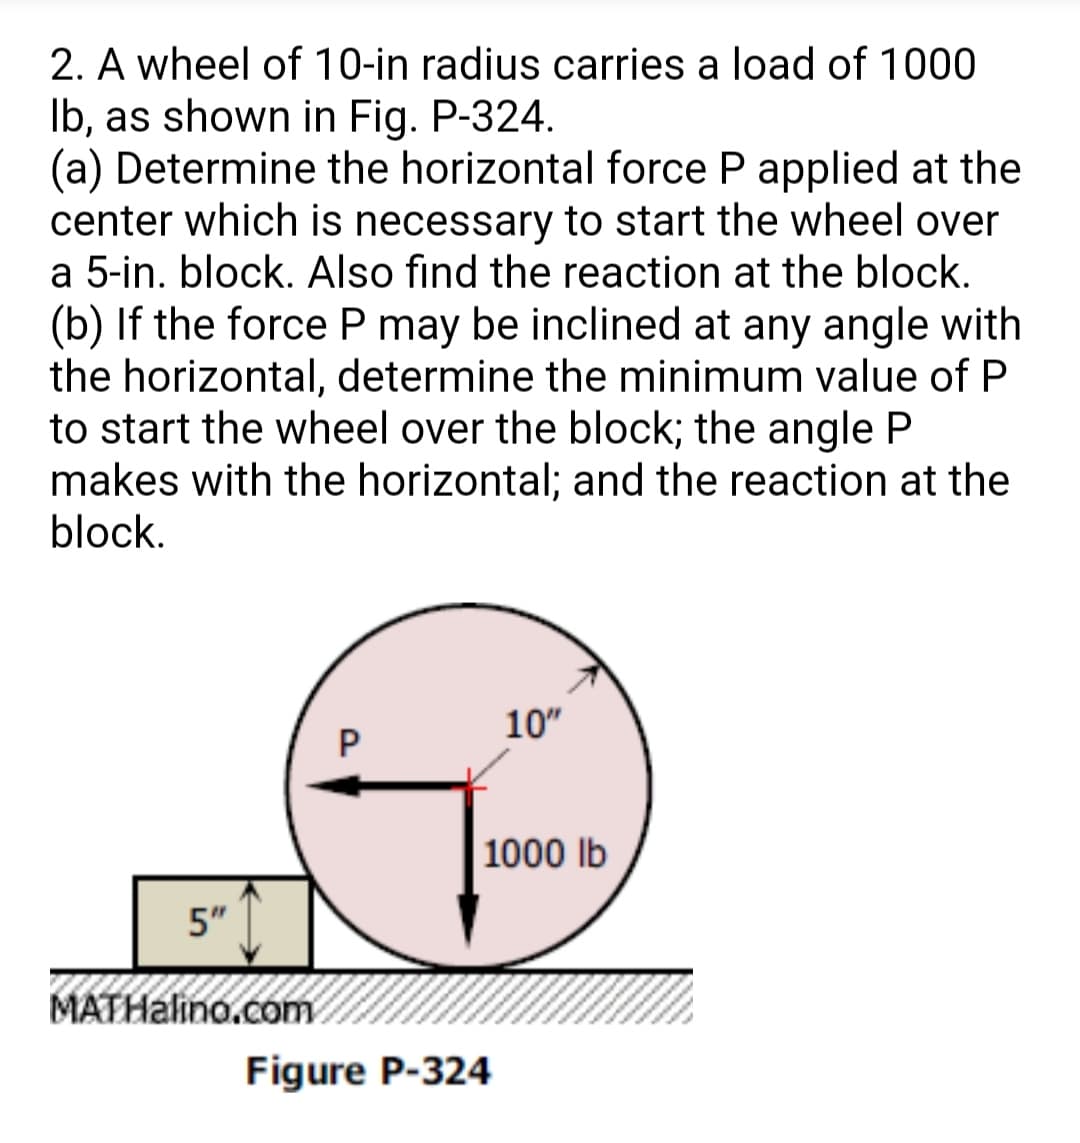 2. A wheel of 10-in radius carries a load of 1000
Ib, as shown in Fig. P-324.
(a) Determine the horizontal force P applied at the
center which is necessary to start the wheel over
a 5-in. block. Also find the reaction at the block.
(b) If the force P may be inclined at any angle with
the horizontal, determine the minimum value of P
to start the wheel over the block; the angle P
makes with the horizontal; and the reaction at the
block.
10"
1000 lb
5"
MATHalino.com
Figure P-324
P.
